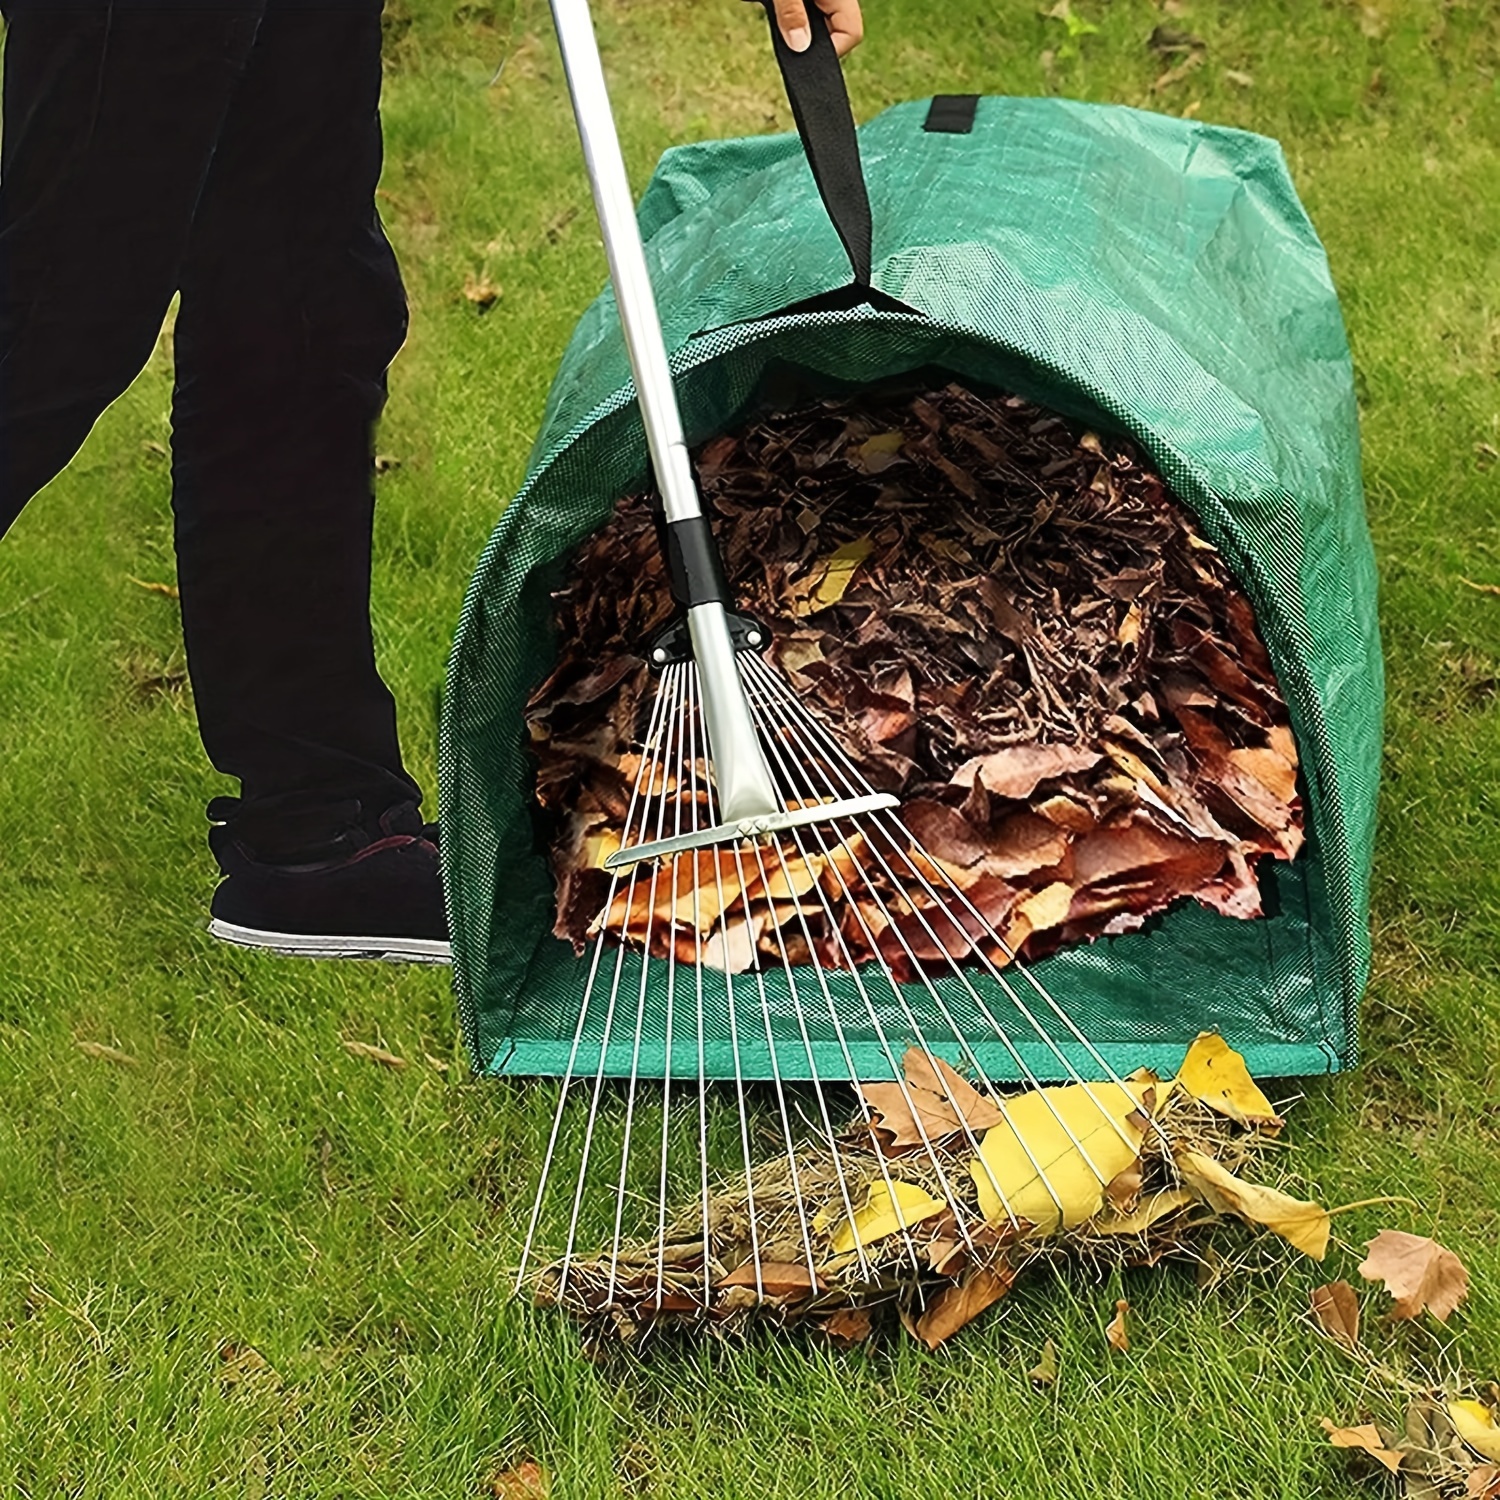 The 7 Best Leaf Bags 2022- Lawn and Leaf Bags Recommendations